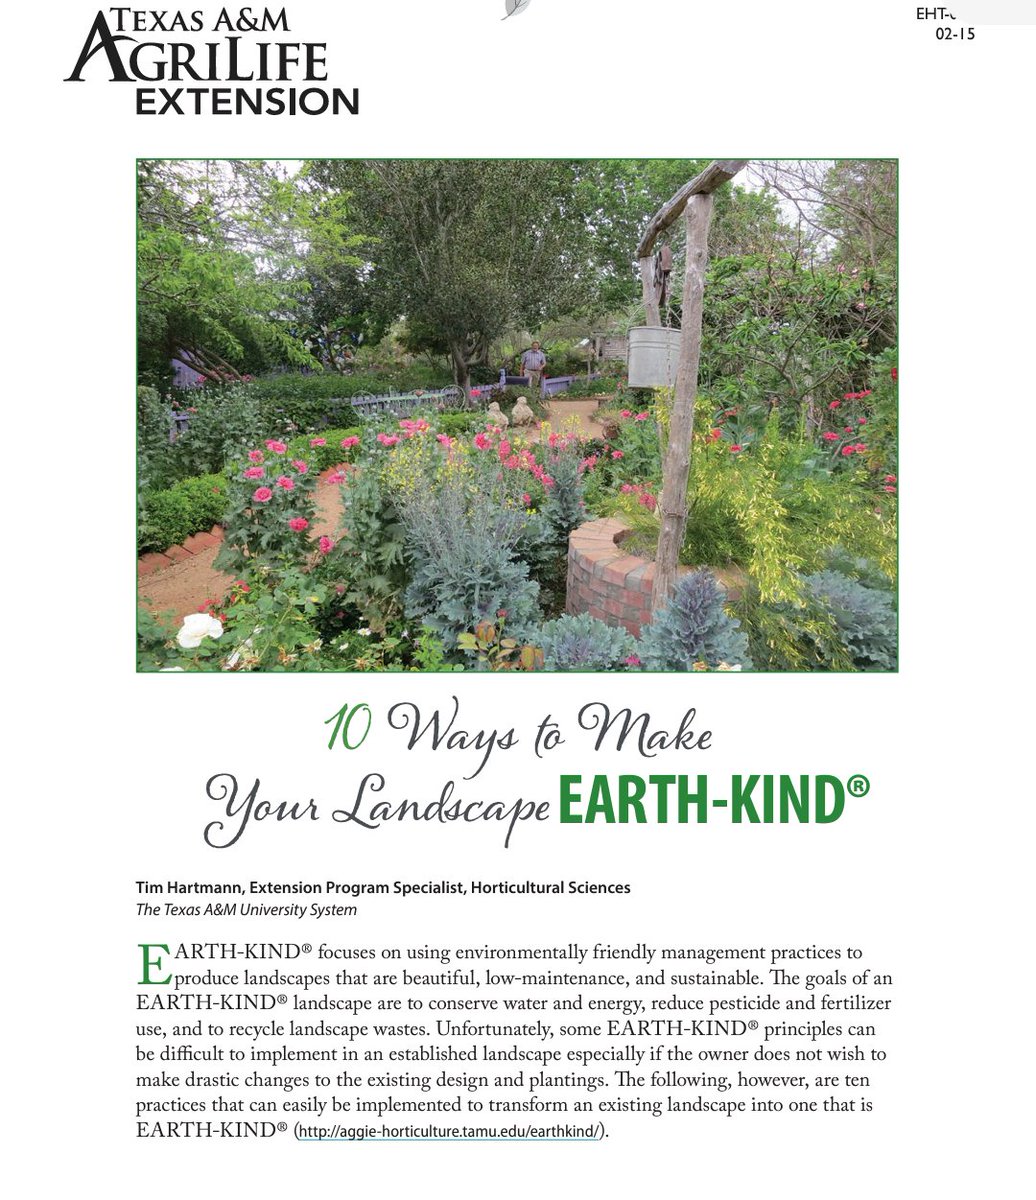 #EarthMonth

Visit the Earth-Kind®️website - landscape planning & plant selection 👇🏾 aggie-horticulture.tamu.edu/earthkind/

10 Ways to Make Your Landscape Earth-Kind®️
txmg.org/hendersonmg/re…
#ResistanceEarth #wtpEARTH #ONEV1